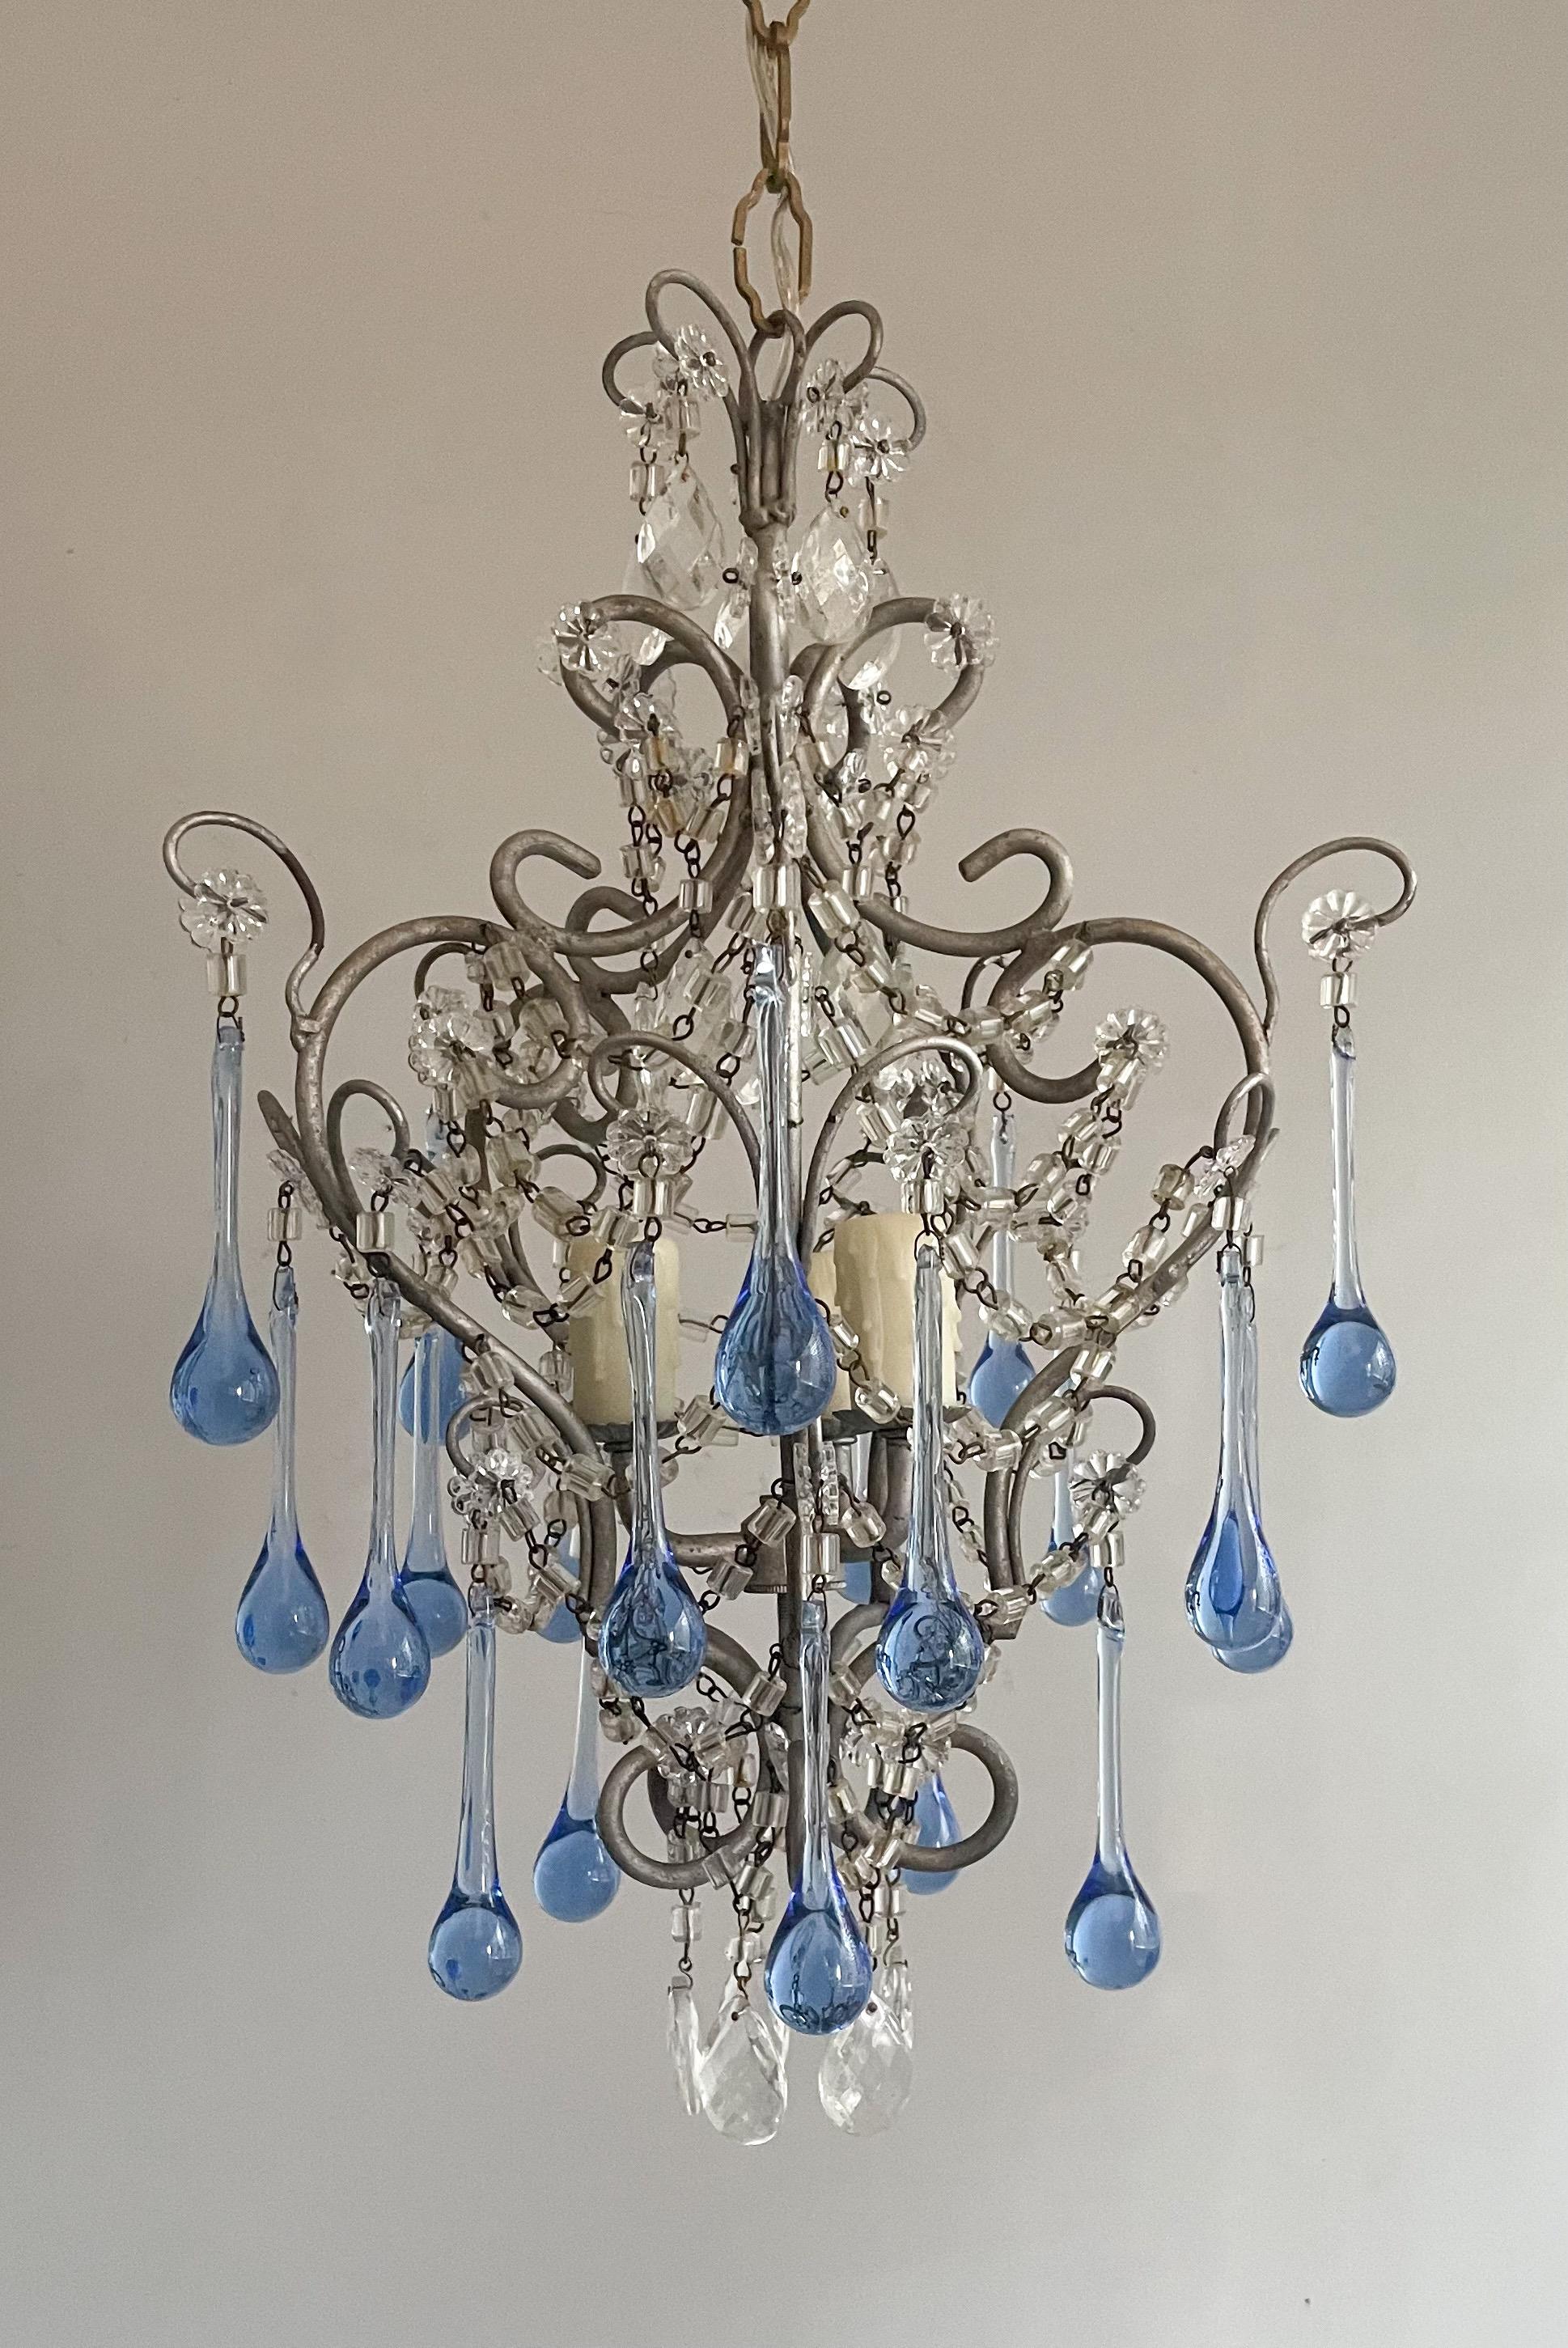 Beautiful, Italian 1960s petite iron and crystal chandelier in the provincial style.

The chandelier features a delicately scrolled iron frame in a sliver-leafed finish. Light sapphire blue Murano glass drops and macaroni beads adorn the fixture